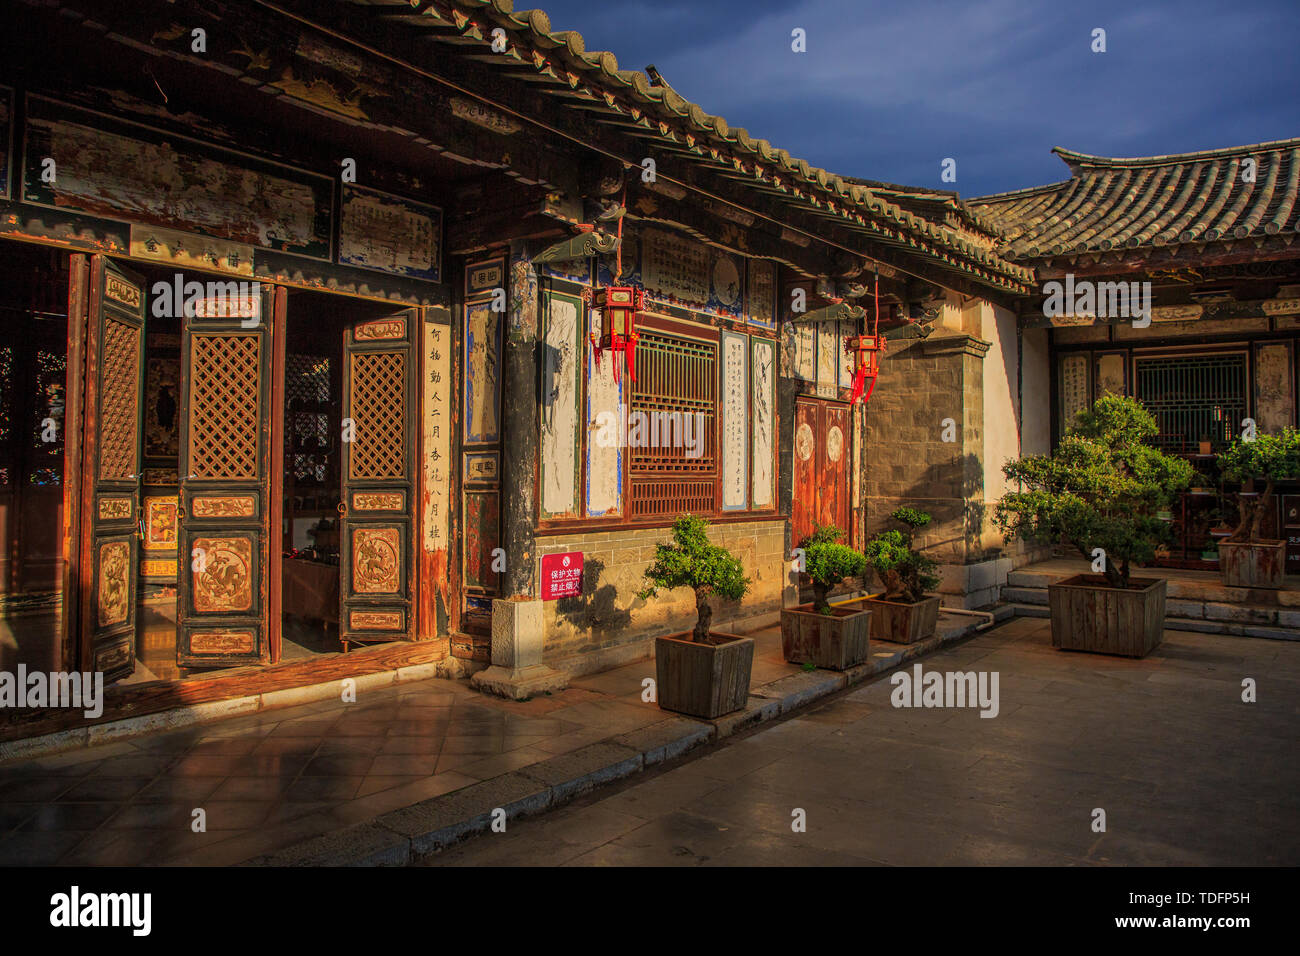 A corner of the ancient building of Zhu Jia Garden Stock Photo